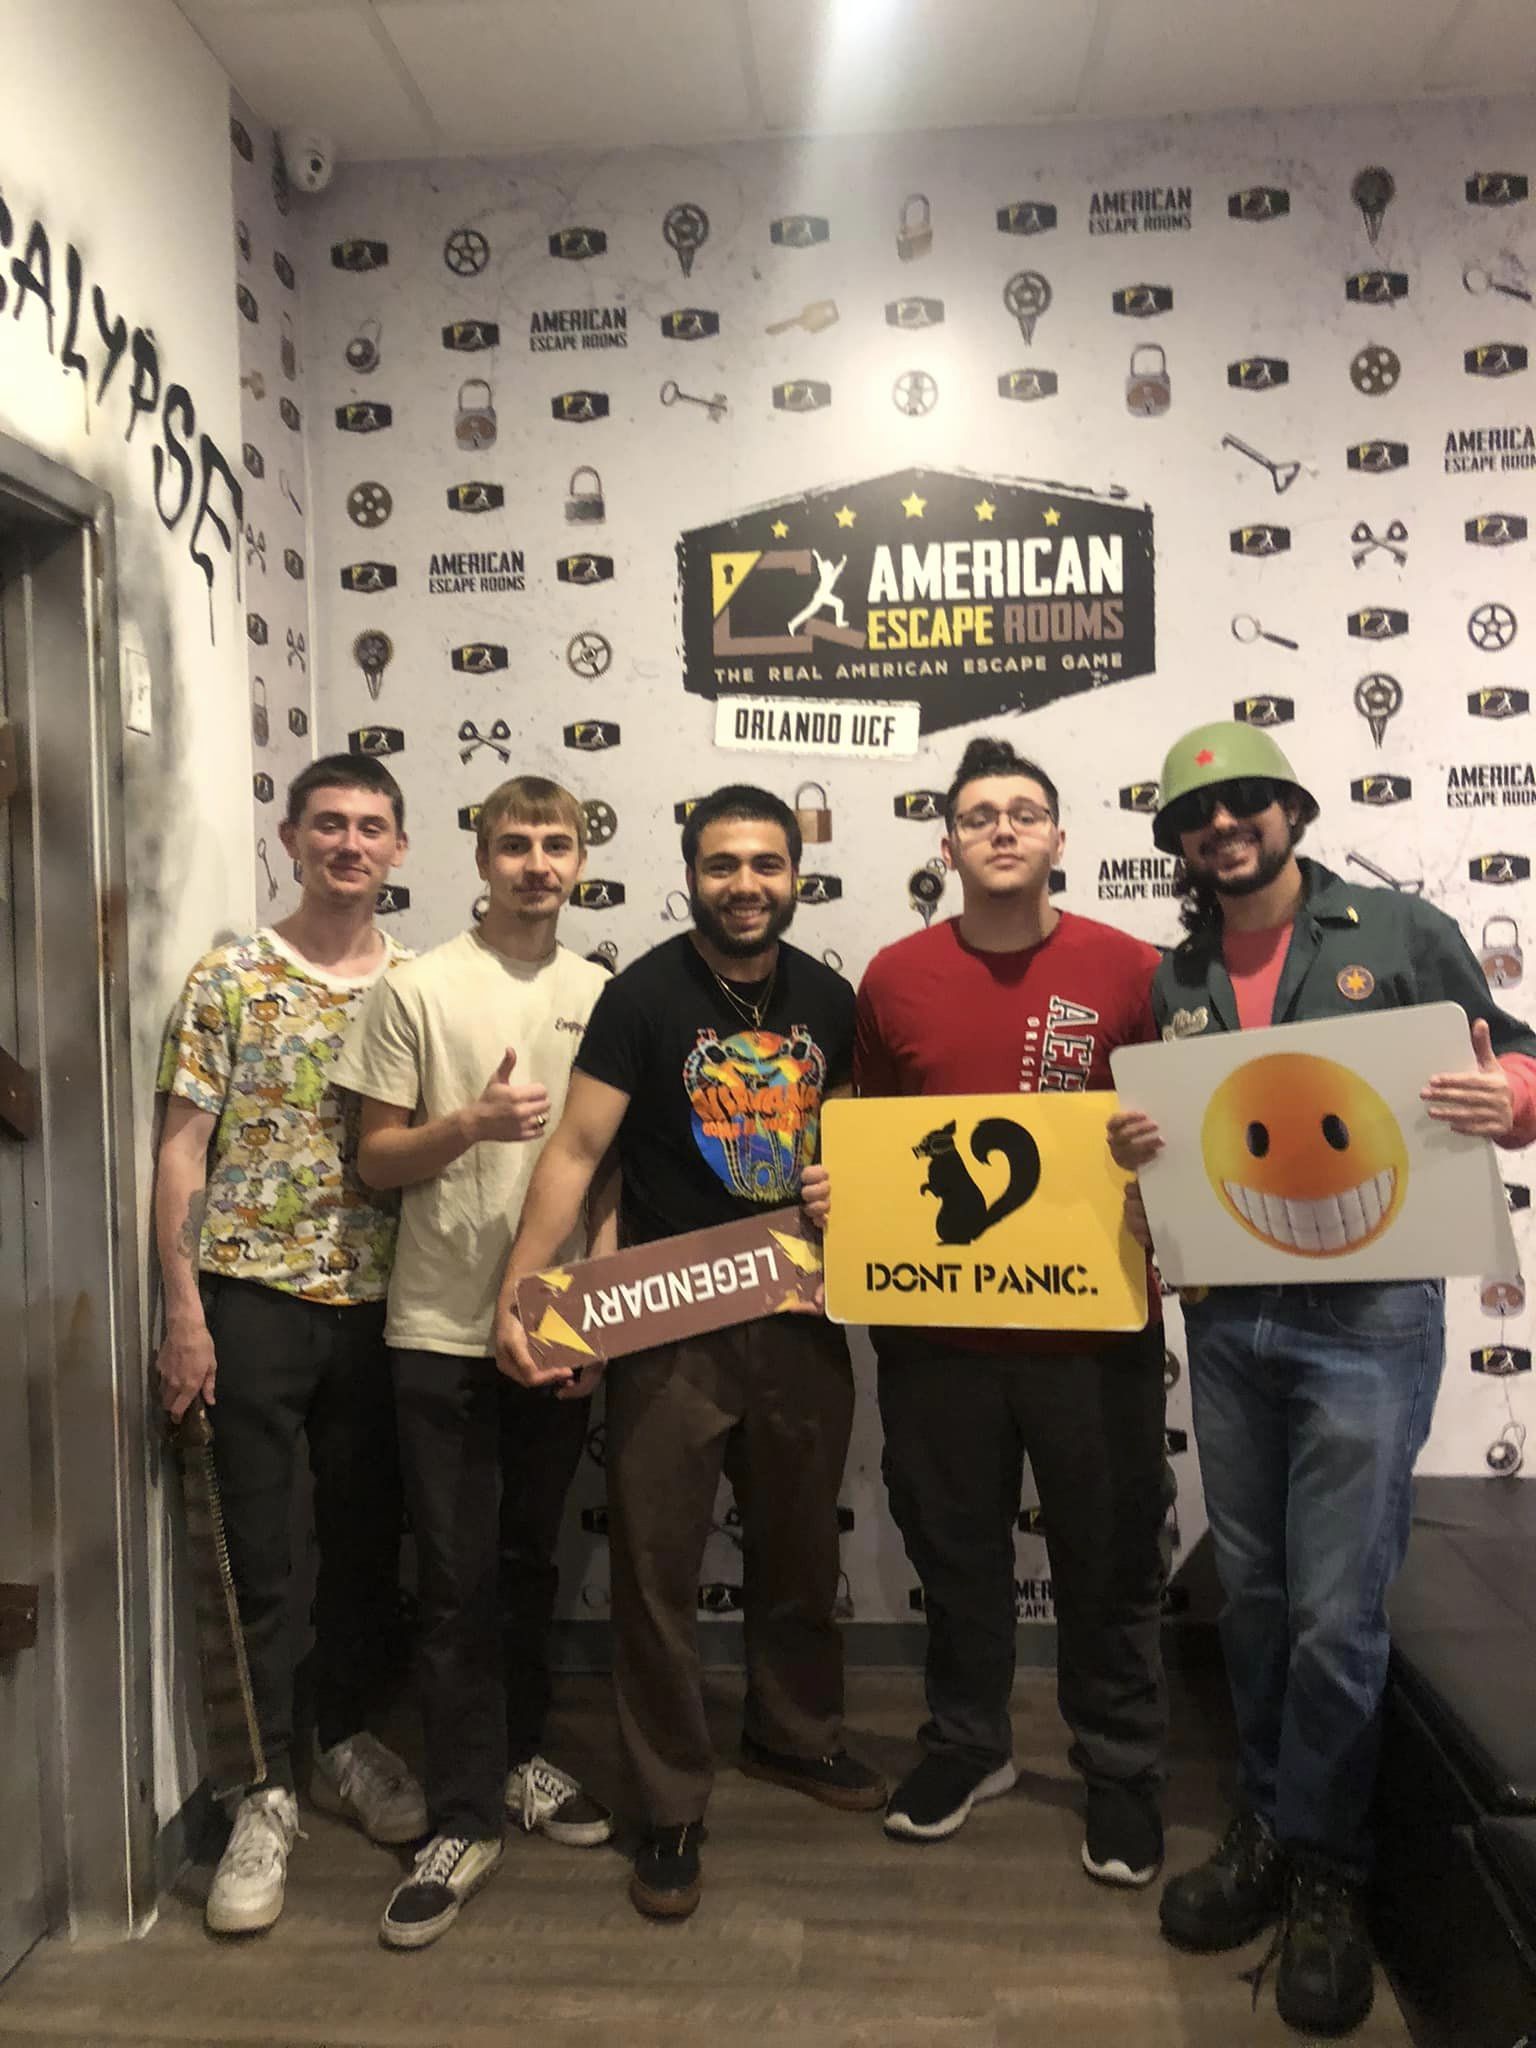 The OG Five played the Zombie Apocalypse - Orlando and finished the game with 9 minutes 59 seconds left. Congratulations! Well done!